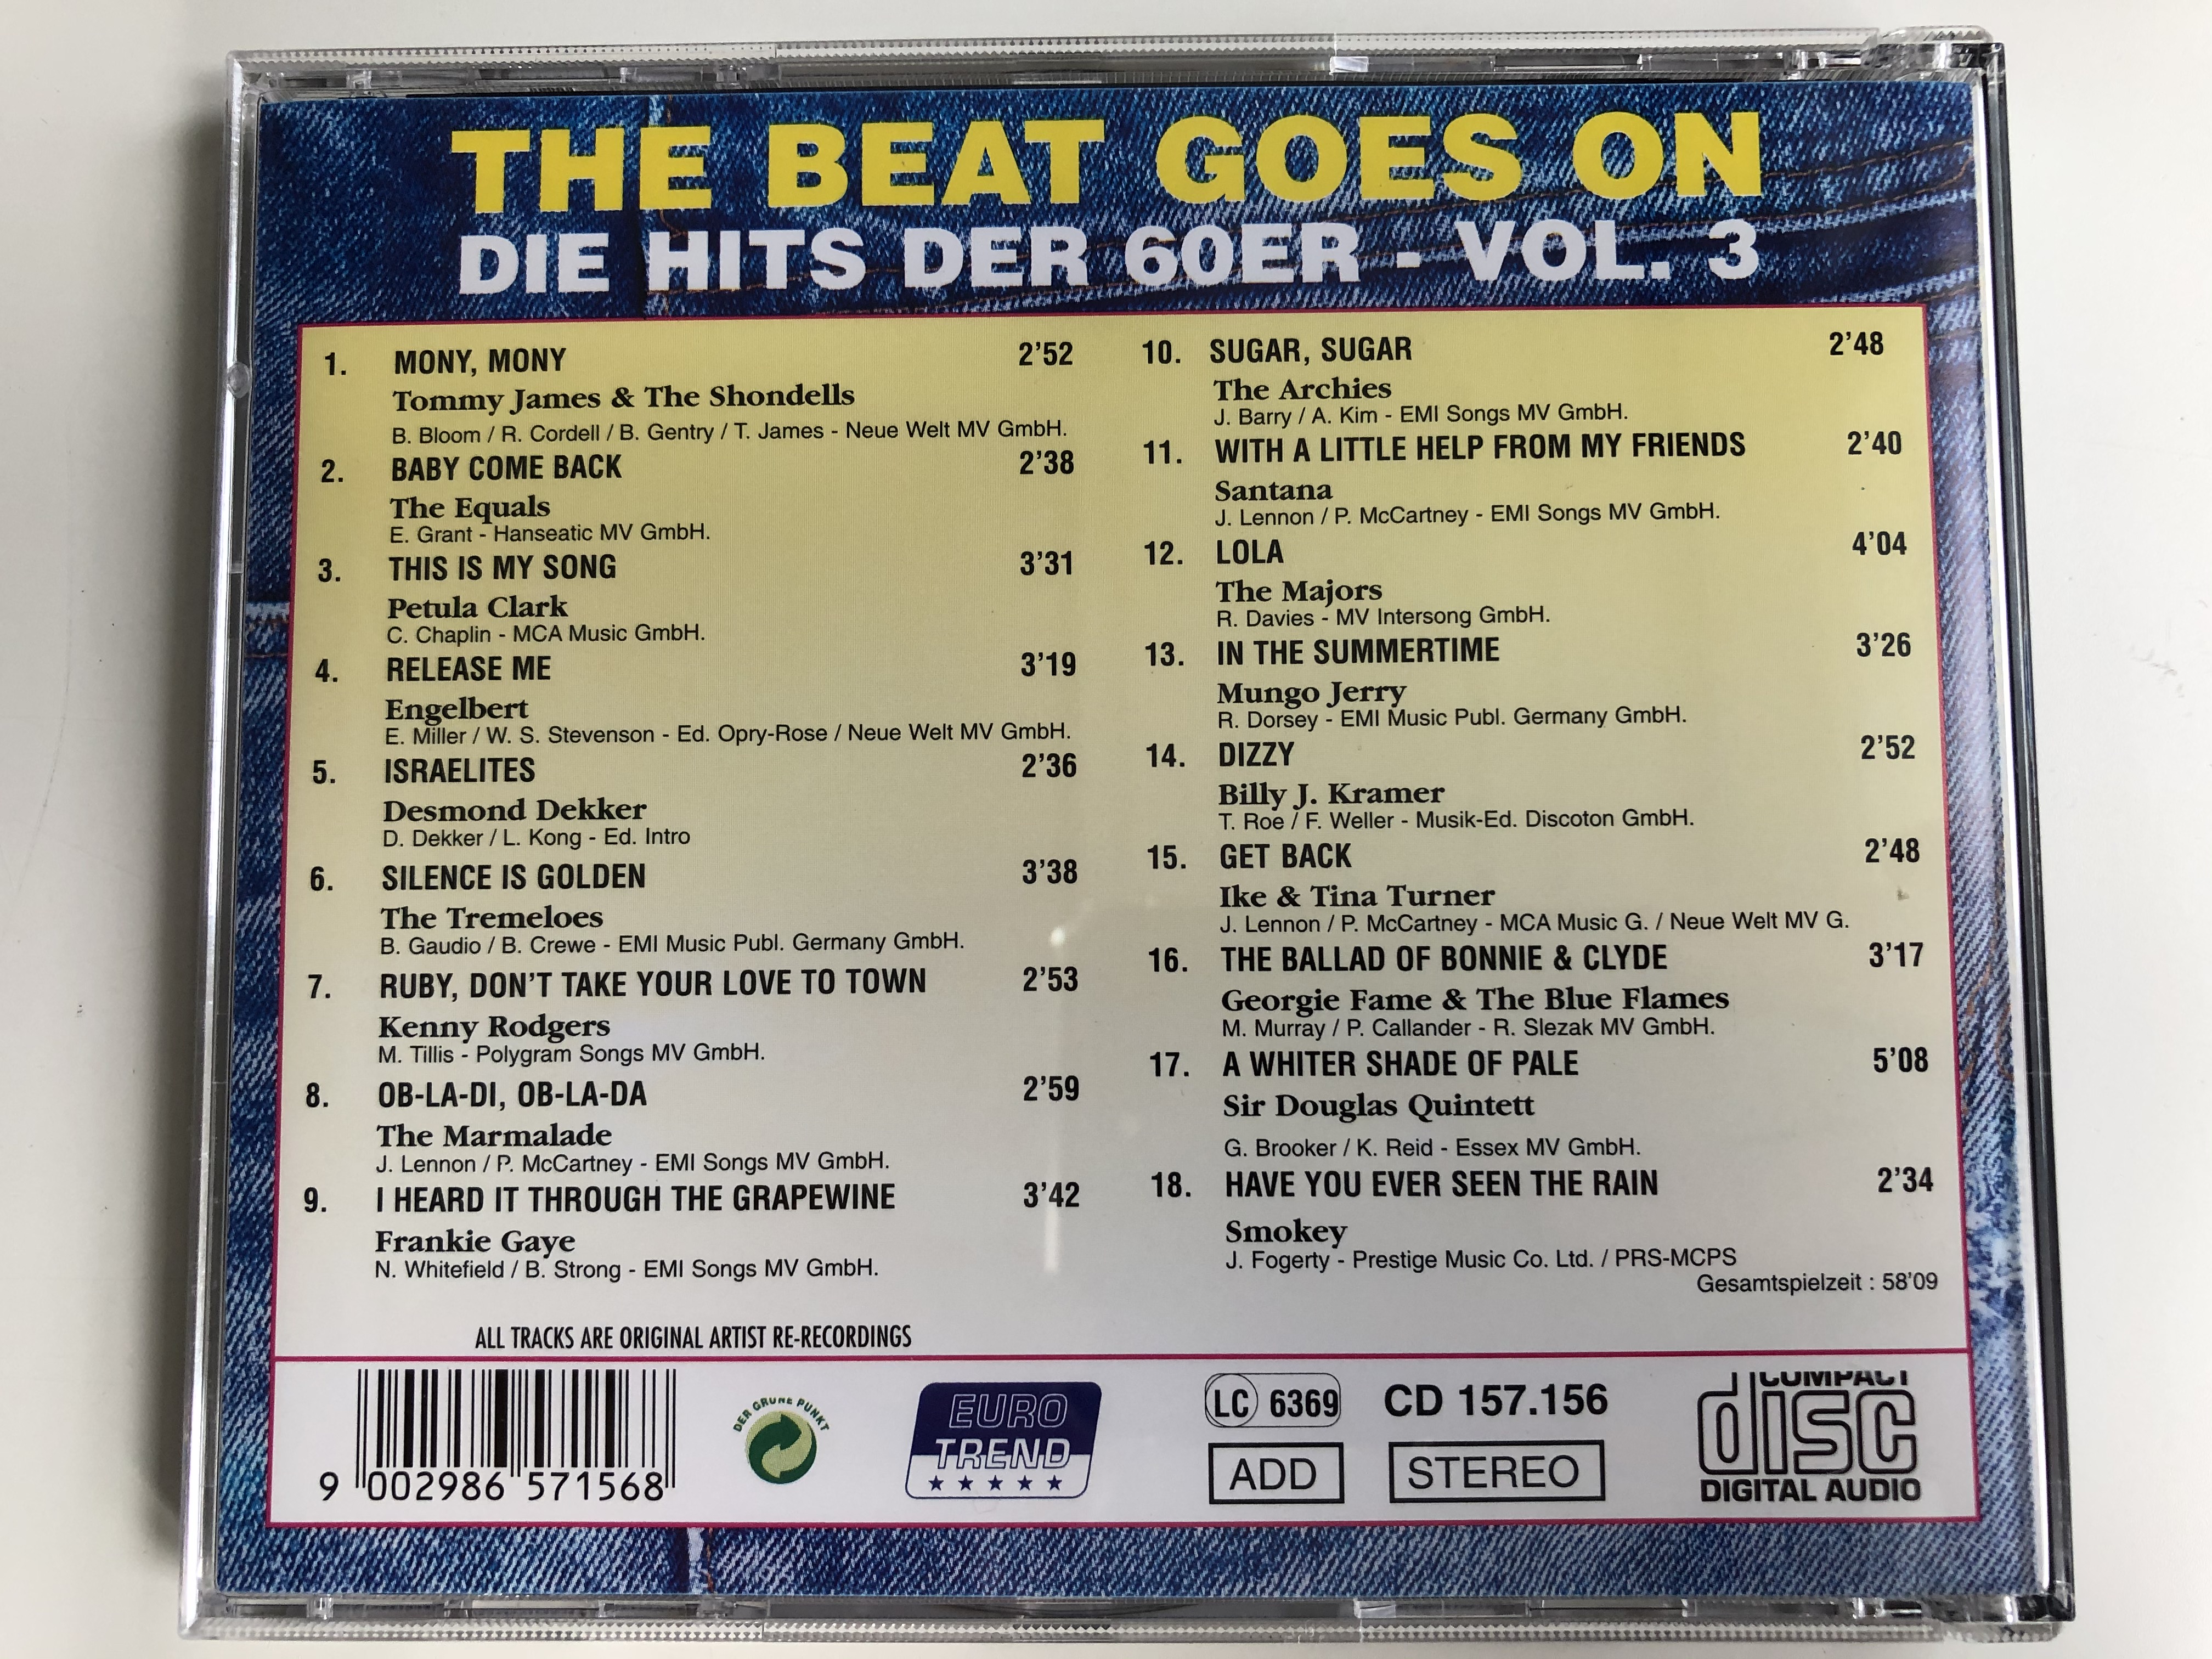 the-beat-goes-on-die-hits-der-60er-vol.-3-silence-is-golden-the-tremeloes-sugar-sugar-the-archies-lola-the-majors-have-you-ever-seen-the-rain-smokie-dizzy-billy-j.-kramer-3-.jpg